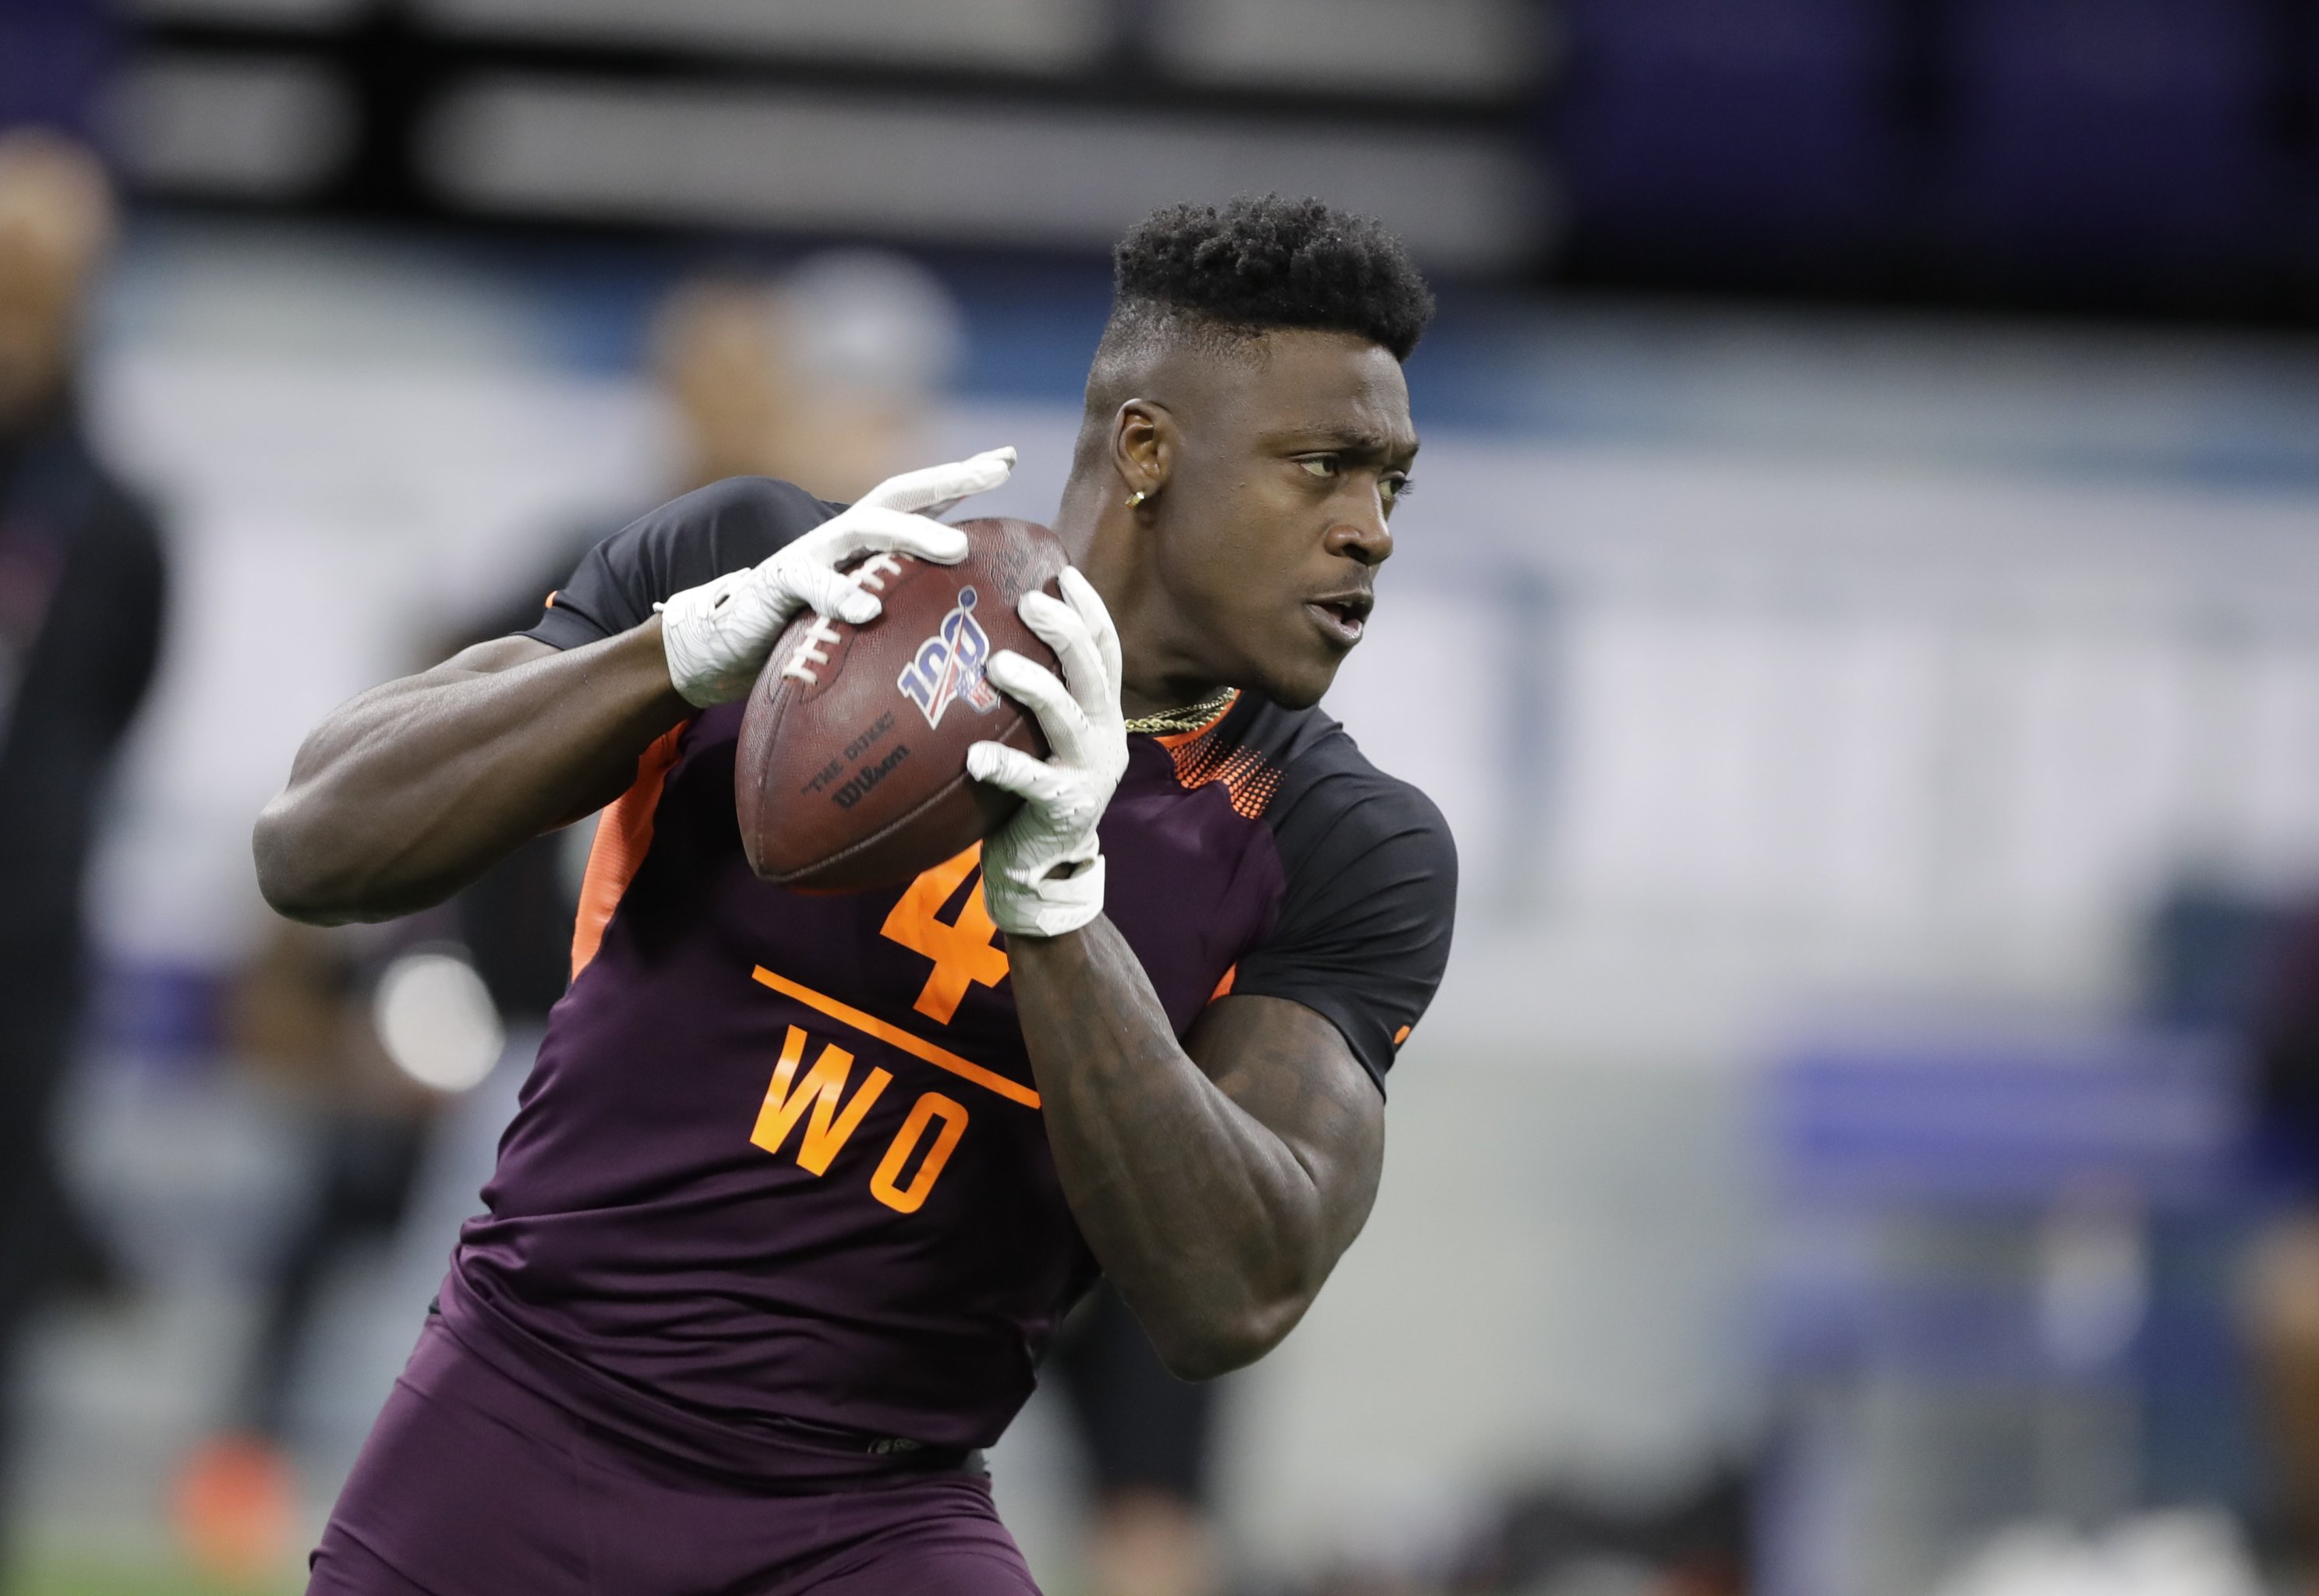 NFL Combine 2019: DK Metcalf just became more terrifying, football